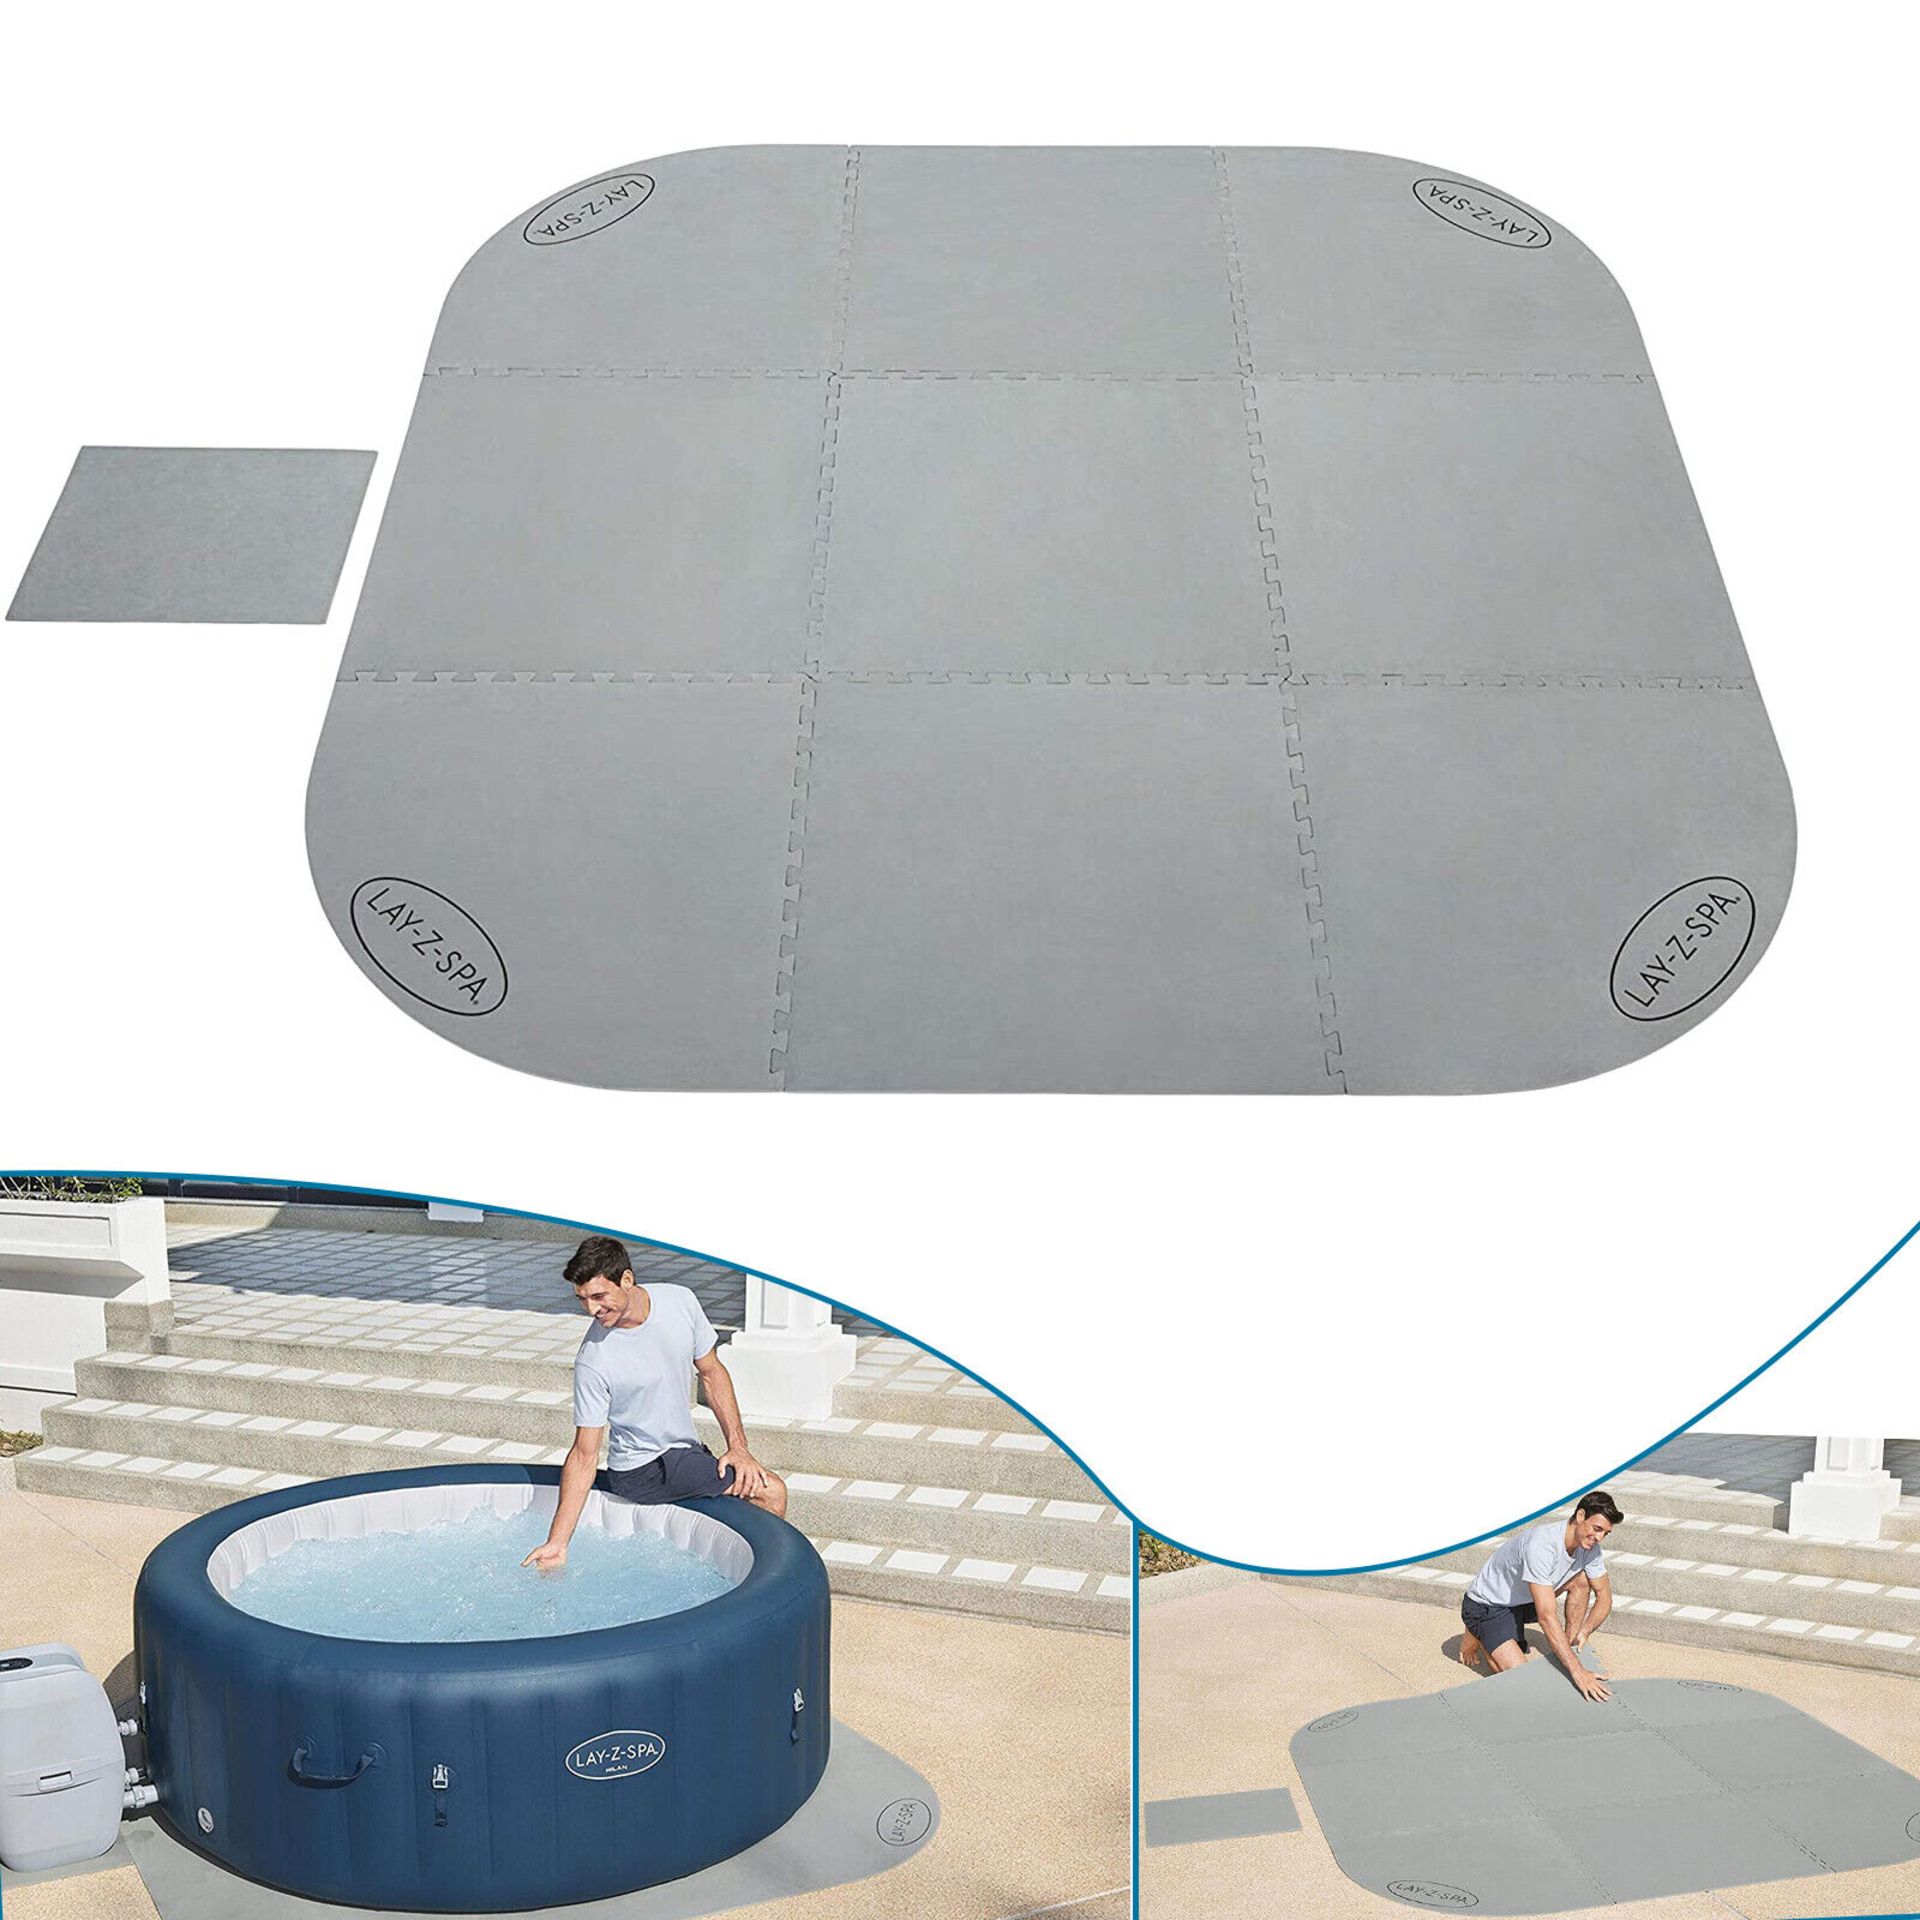 4 X BRAND NEW BESTWAY LAY-Z-SPA EXTRA HOT TUB FLOOR PROTECTOR PADS - 85 INCH X 85 INCH / 2.16 M - - Image 2 of 4